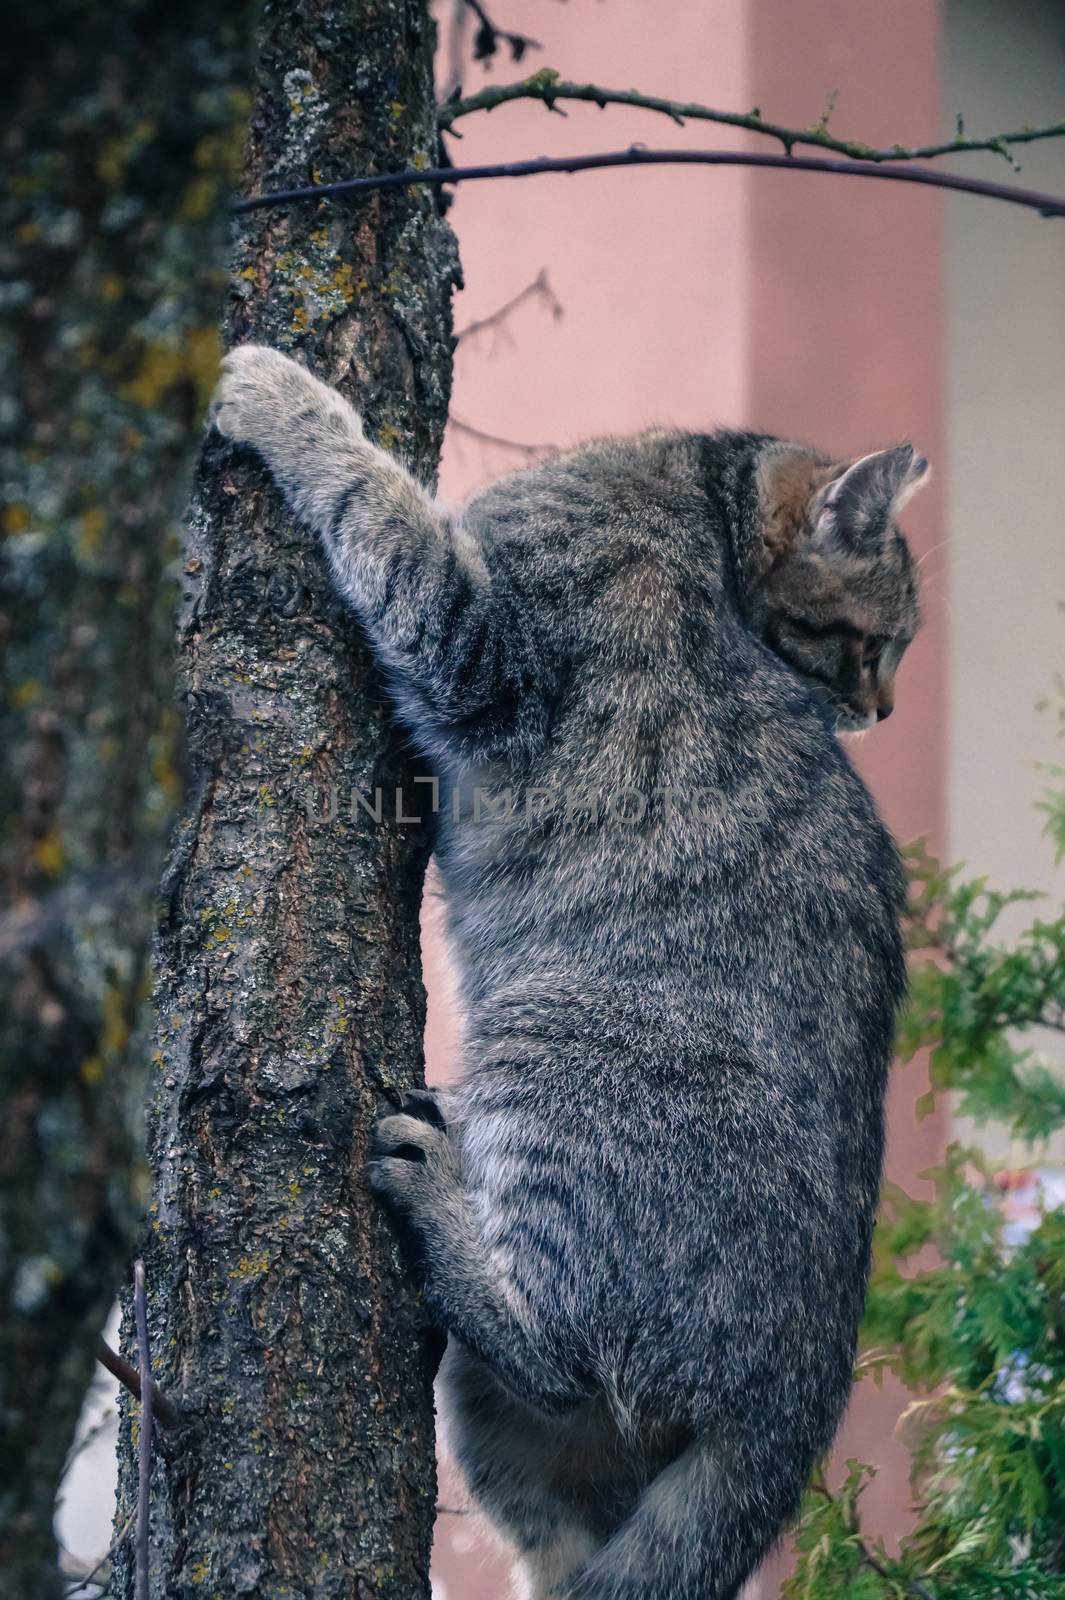 the cat climbed the tree in fear by Oleczka11